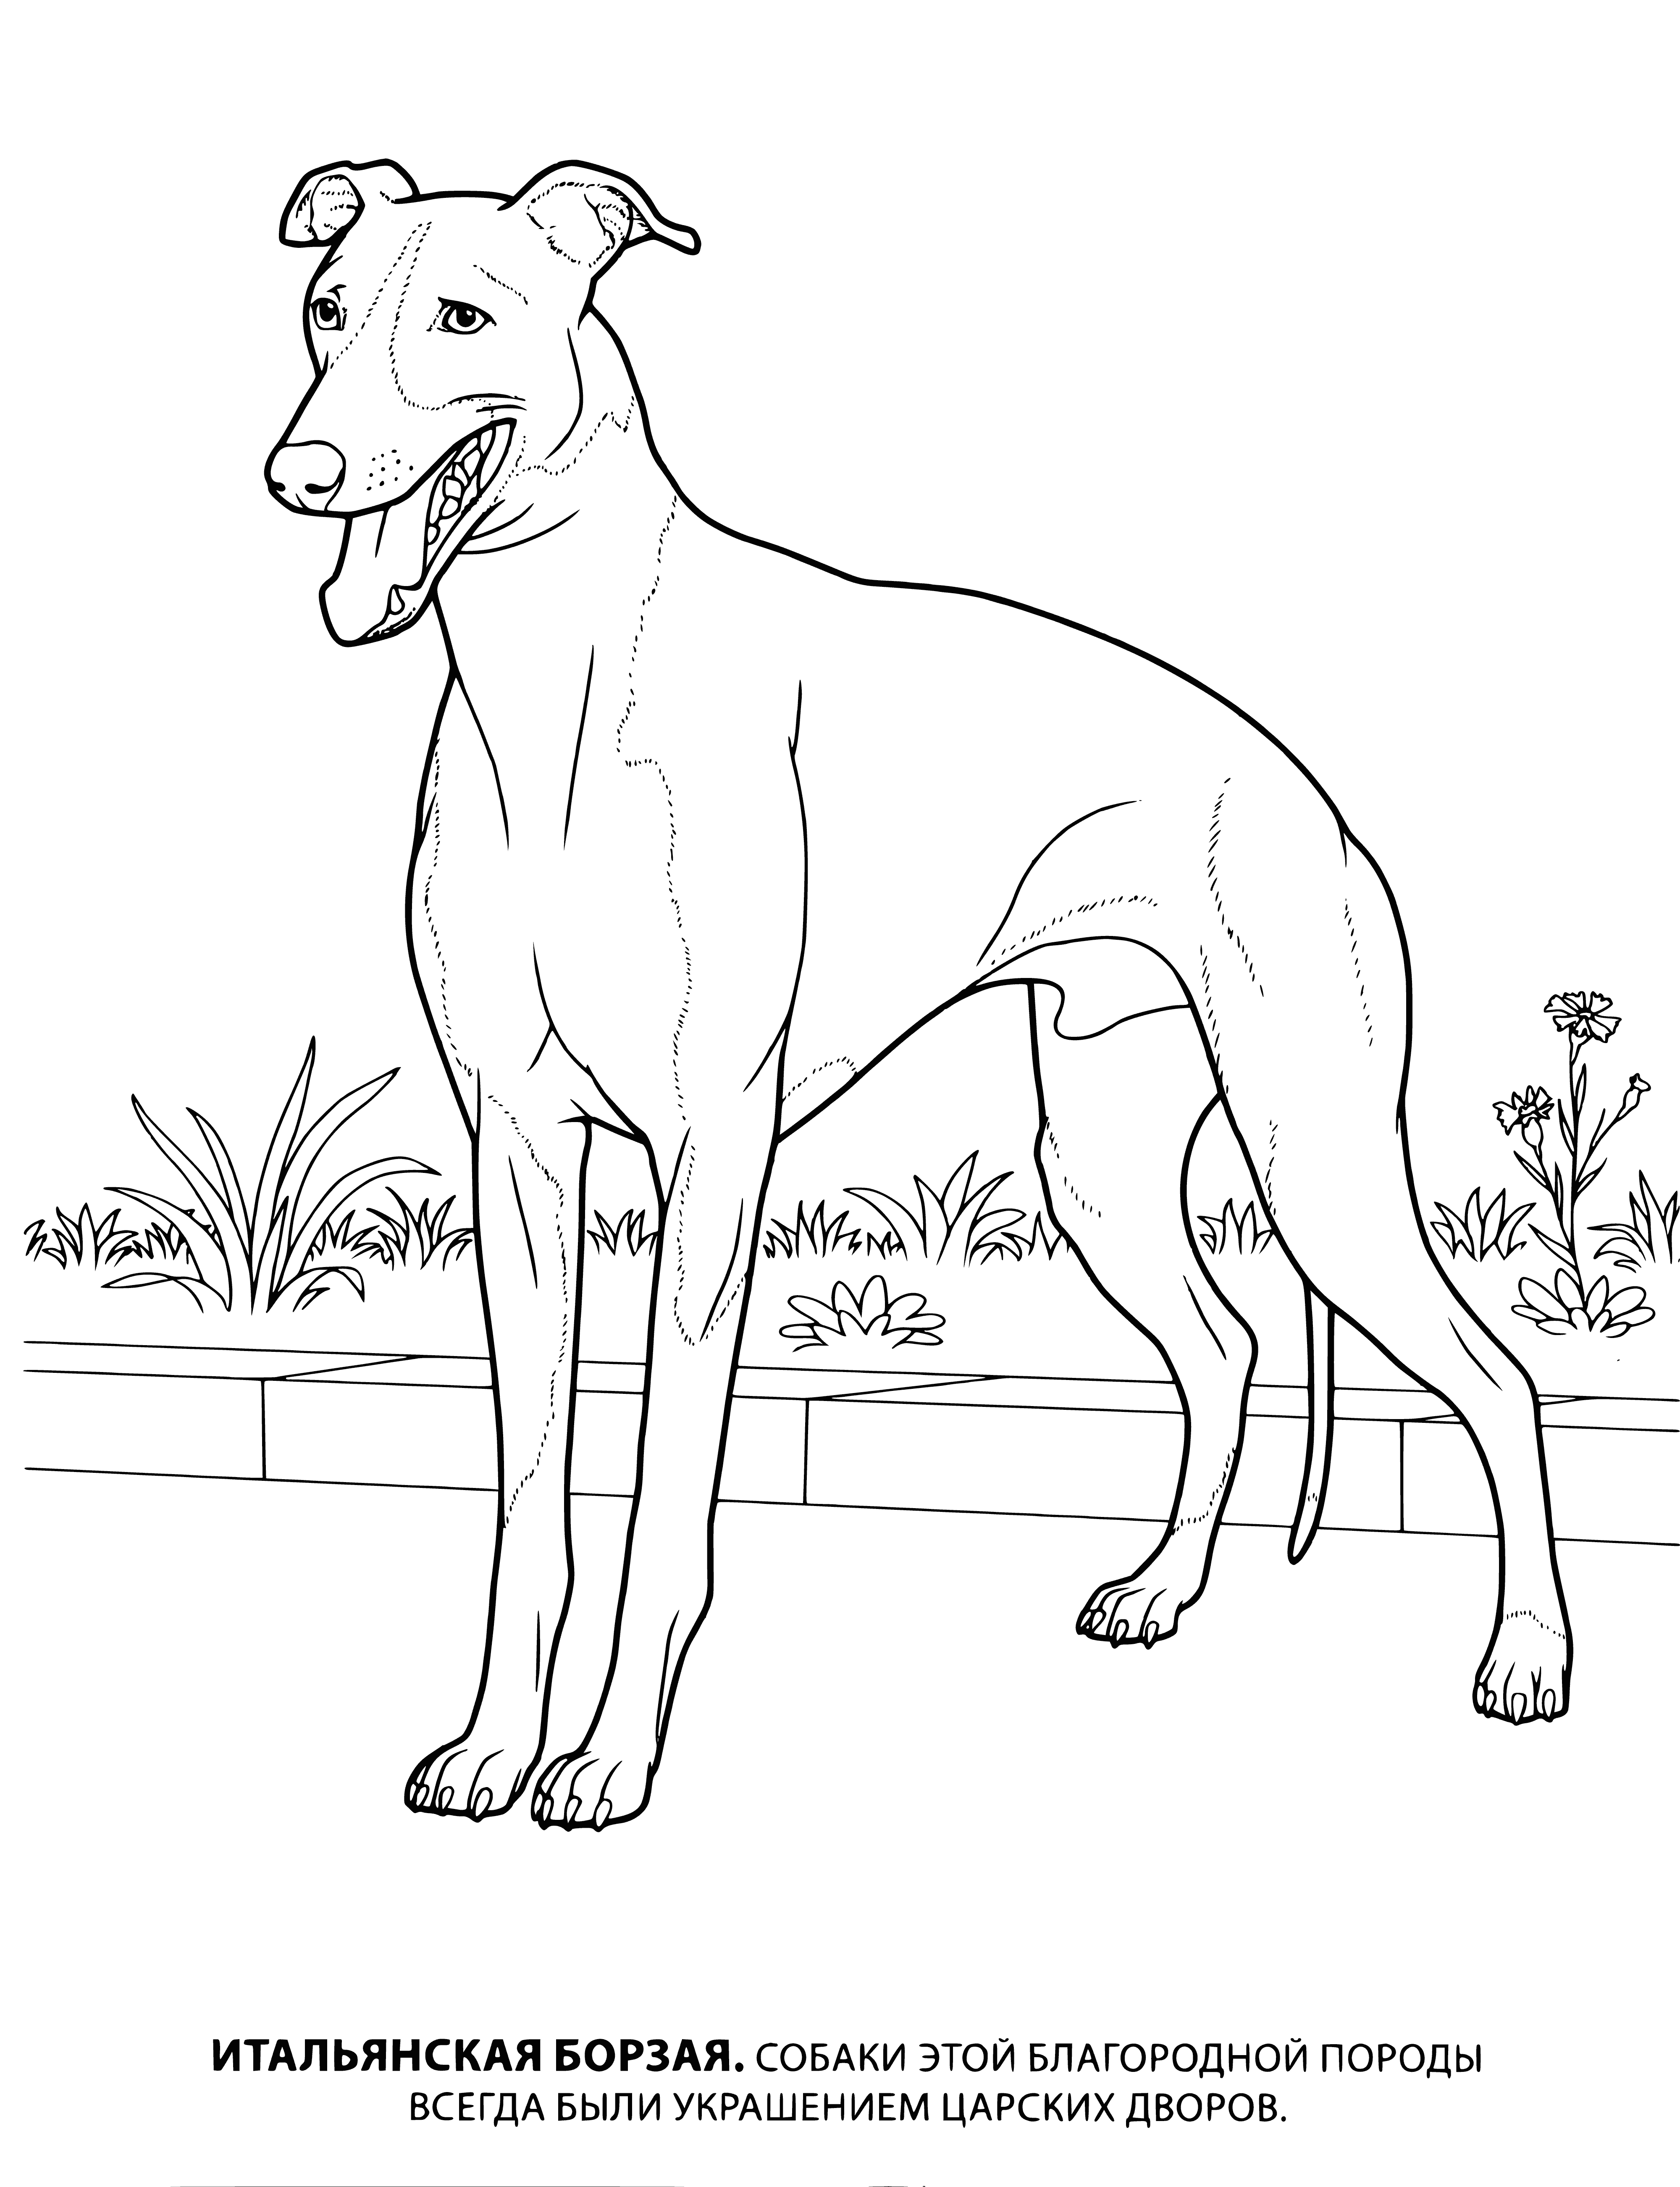 Italian greyhound coloring page